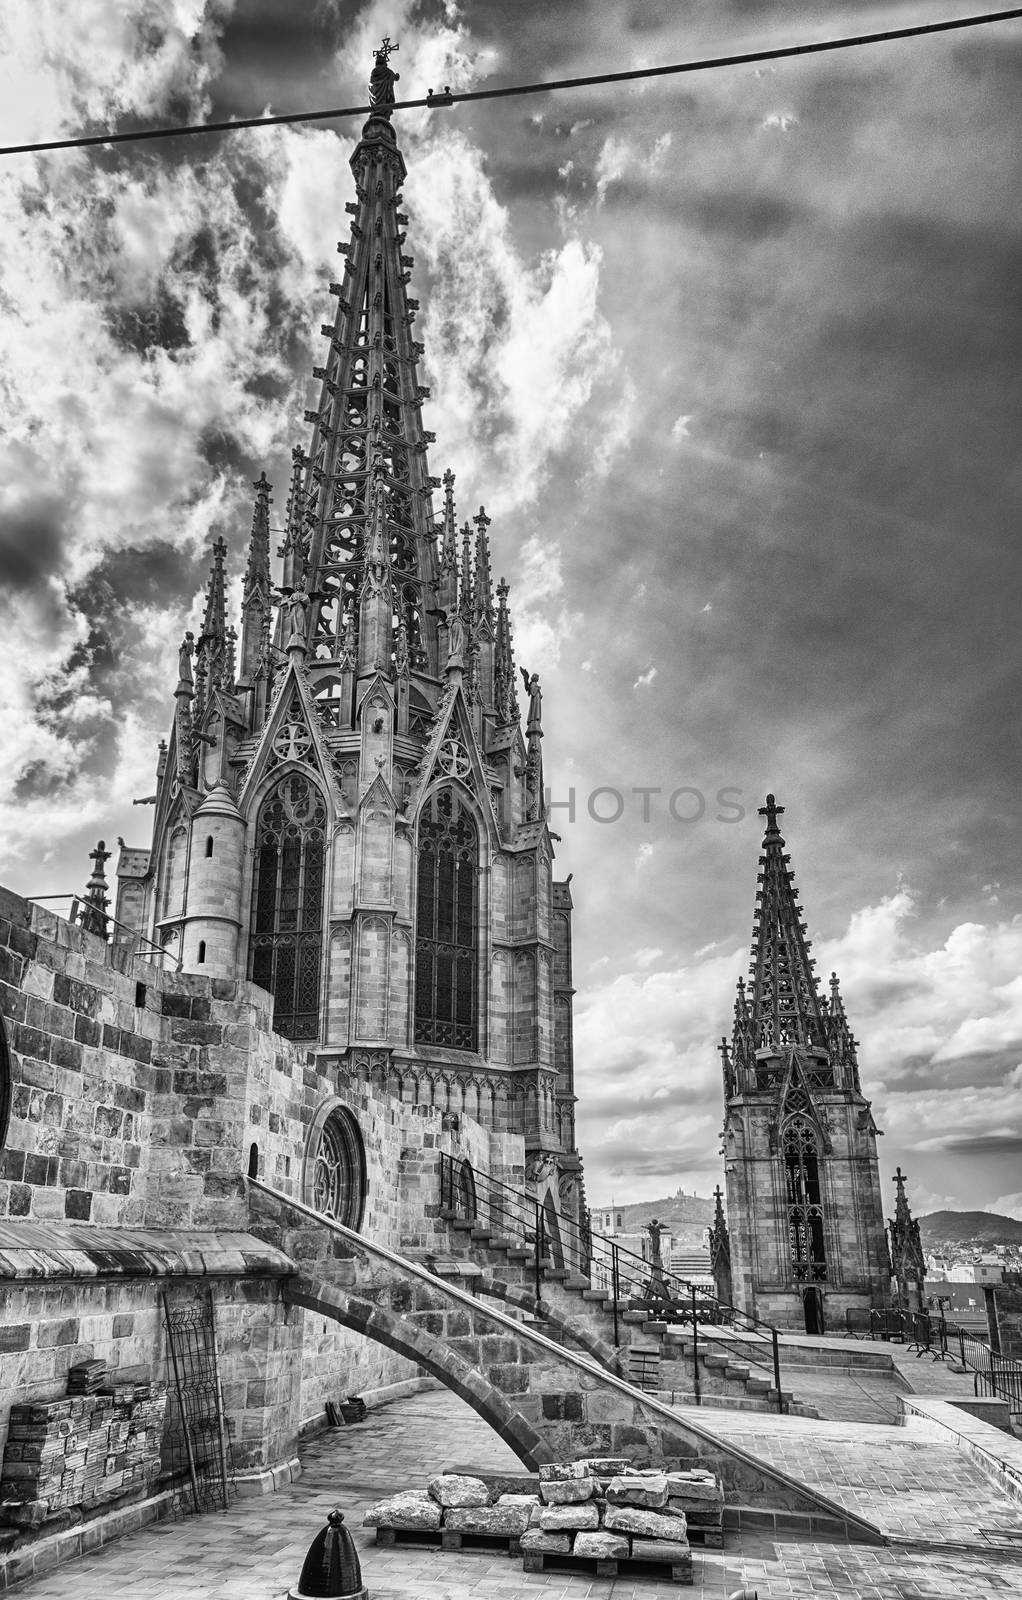 Main tower of the Barcelona Cathedral, Catalonia, Spain by marcorubino